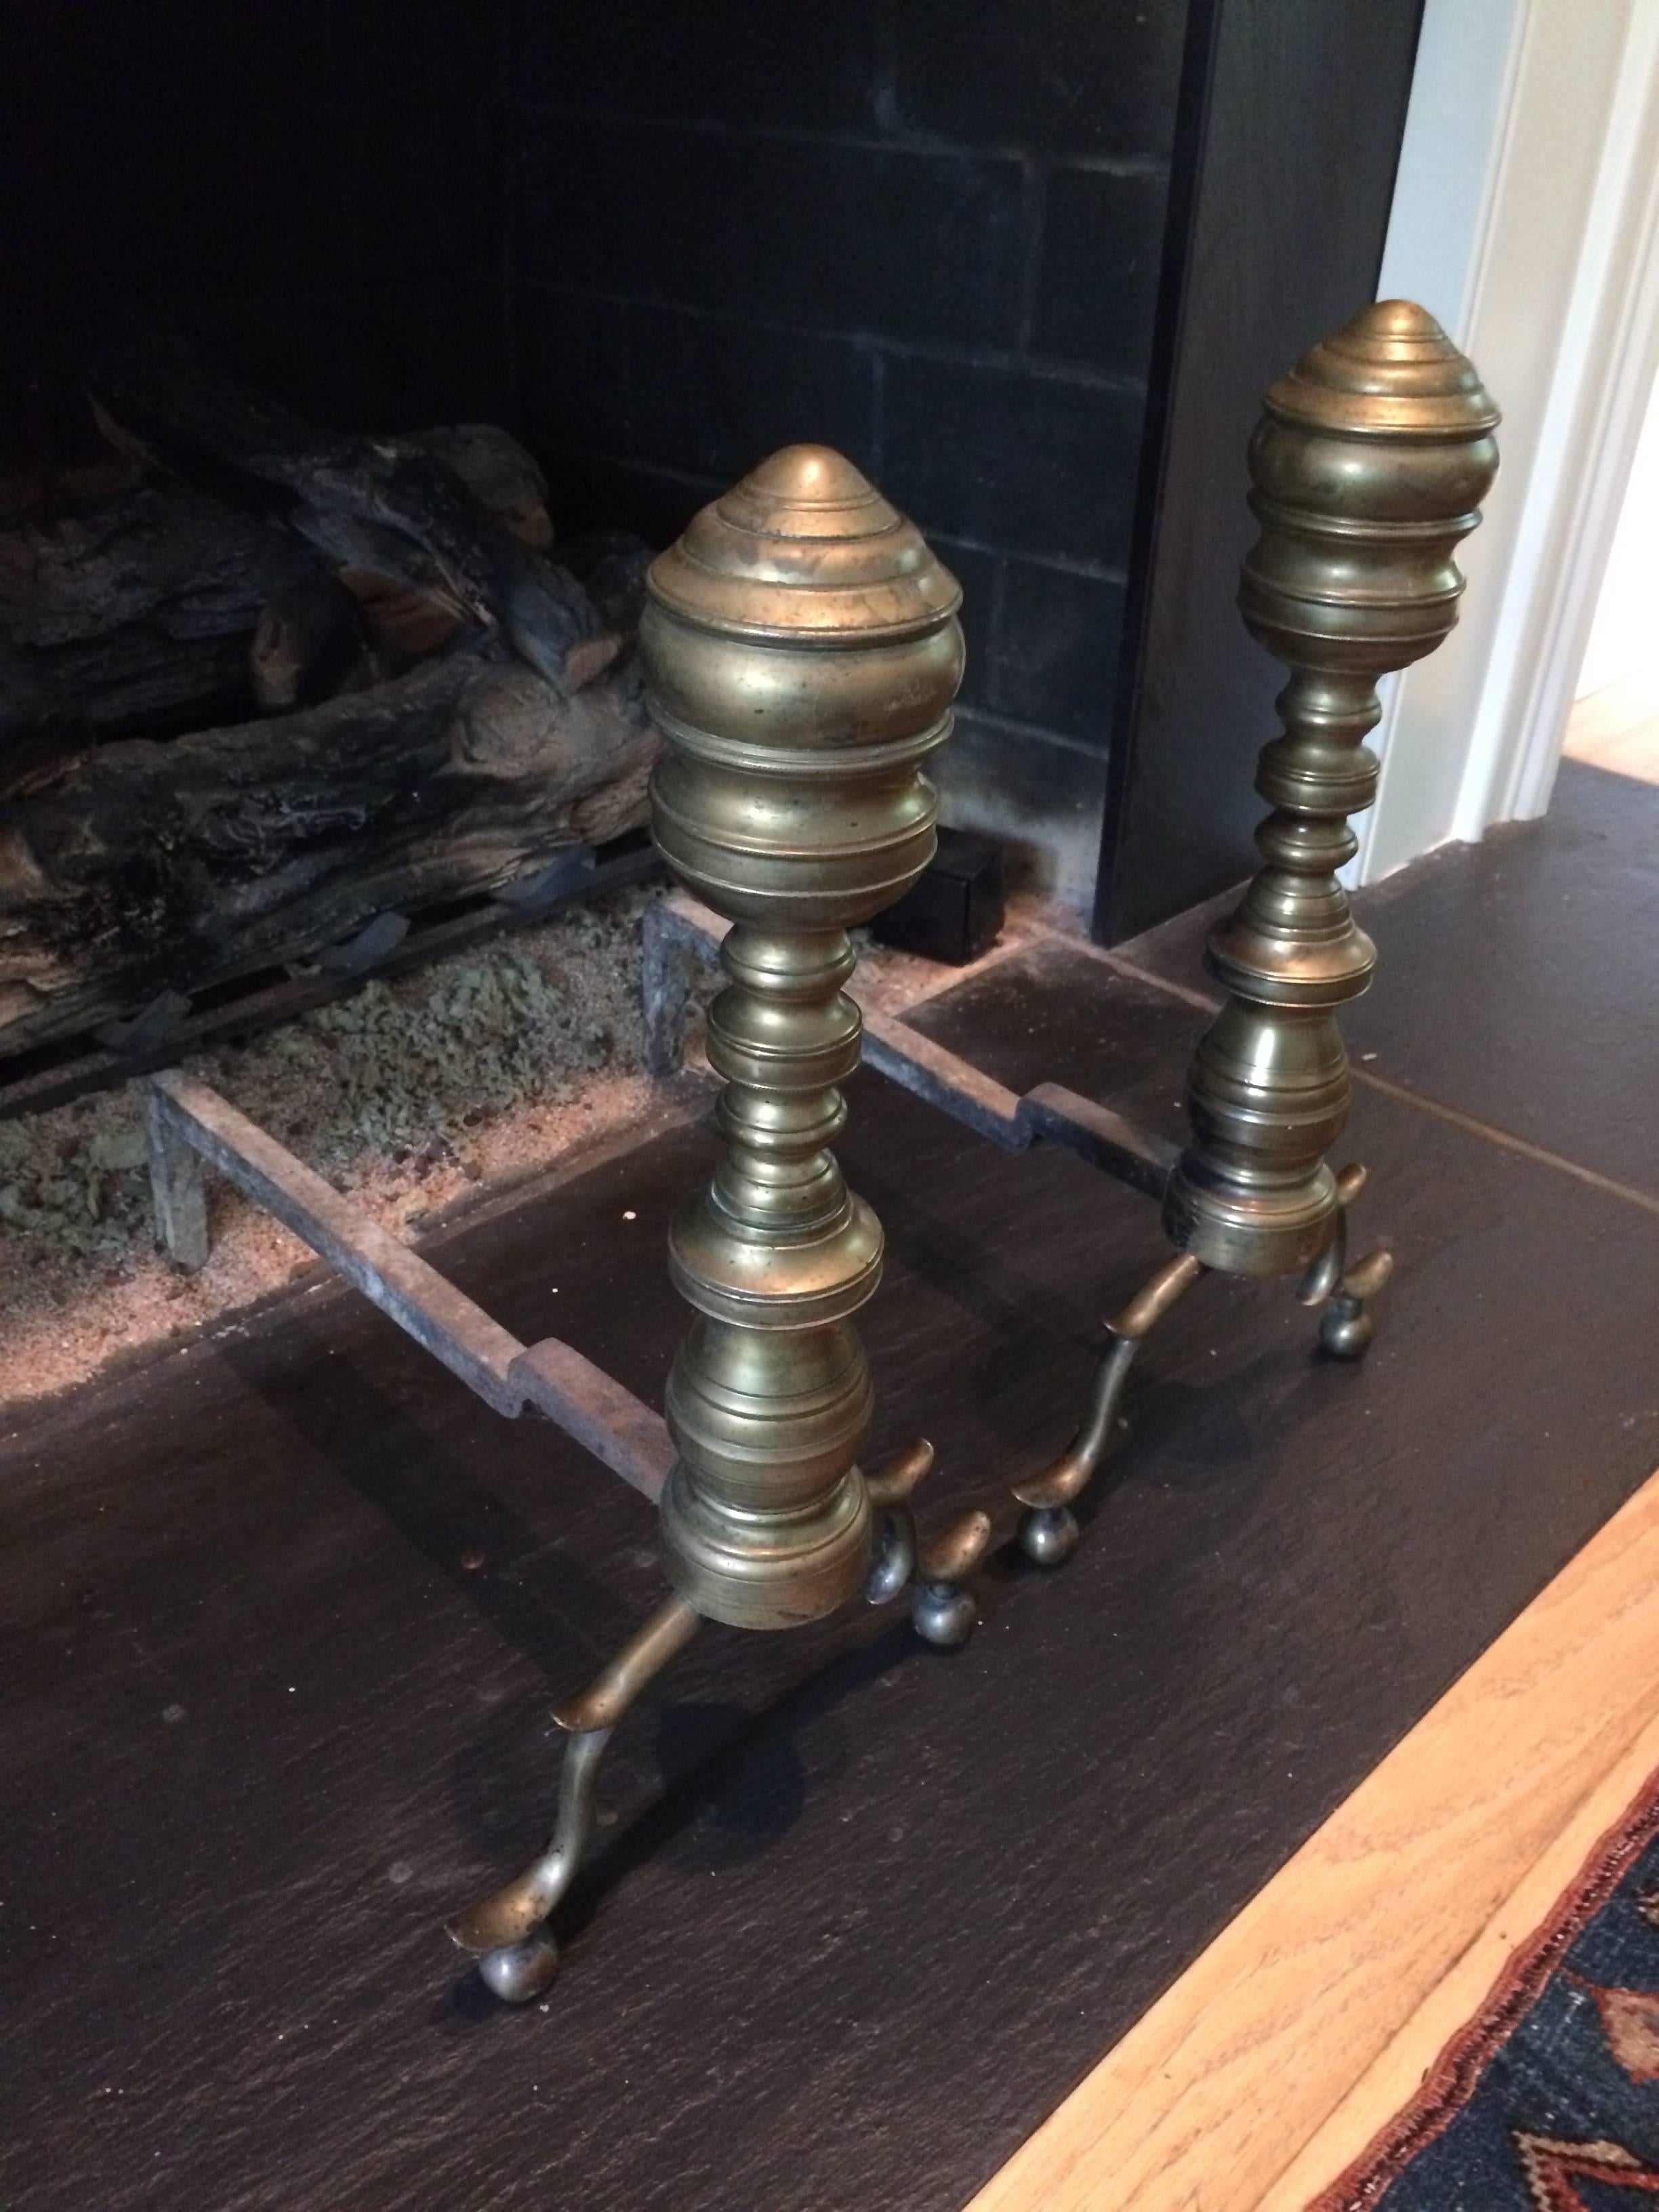 Classic pair of antique andirons in a aged brass.